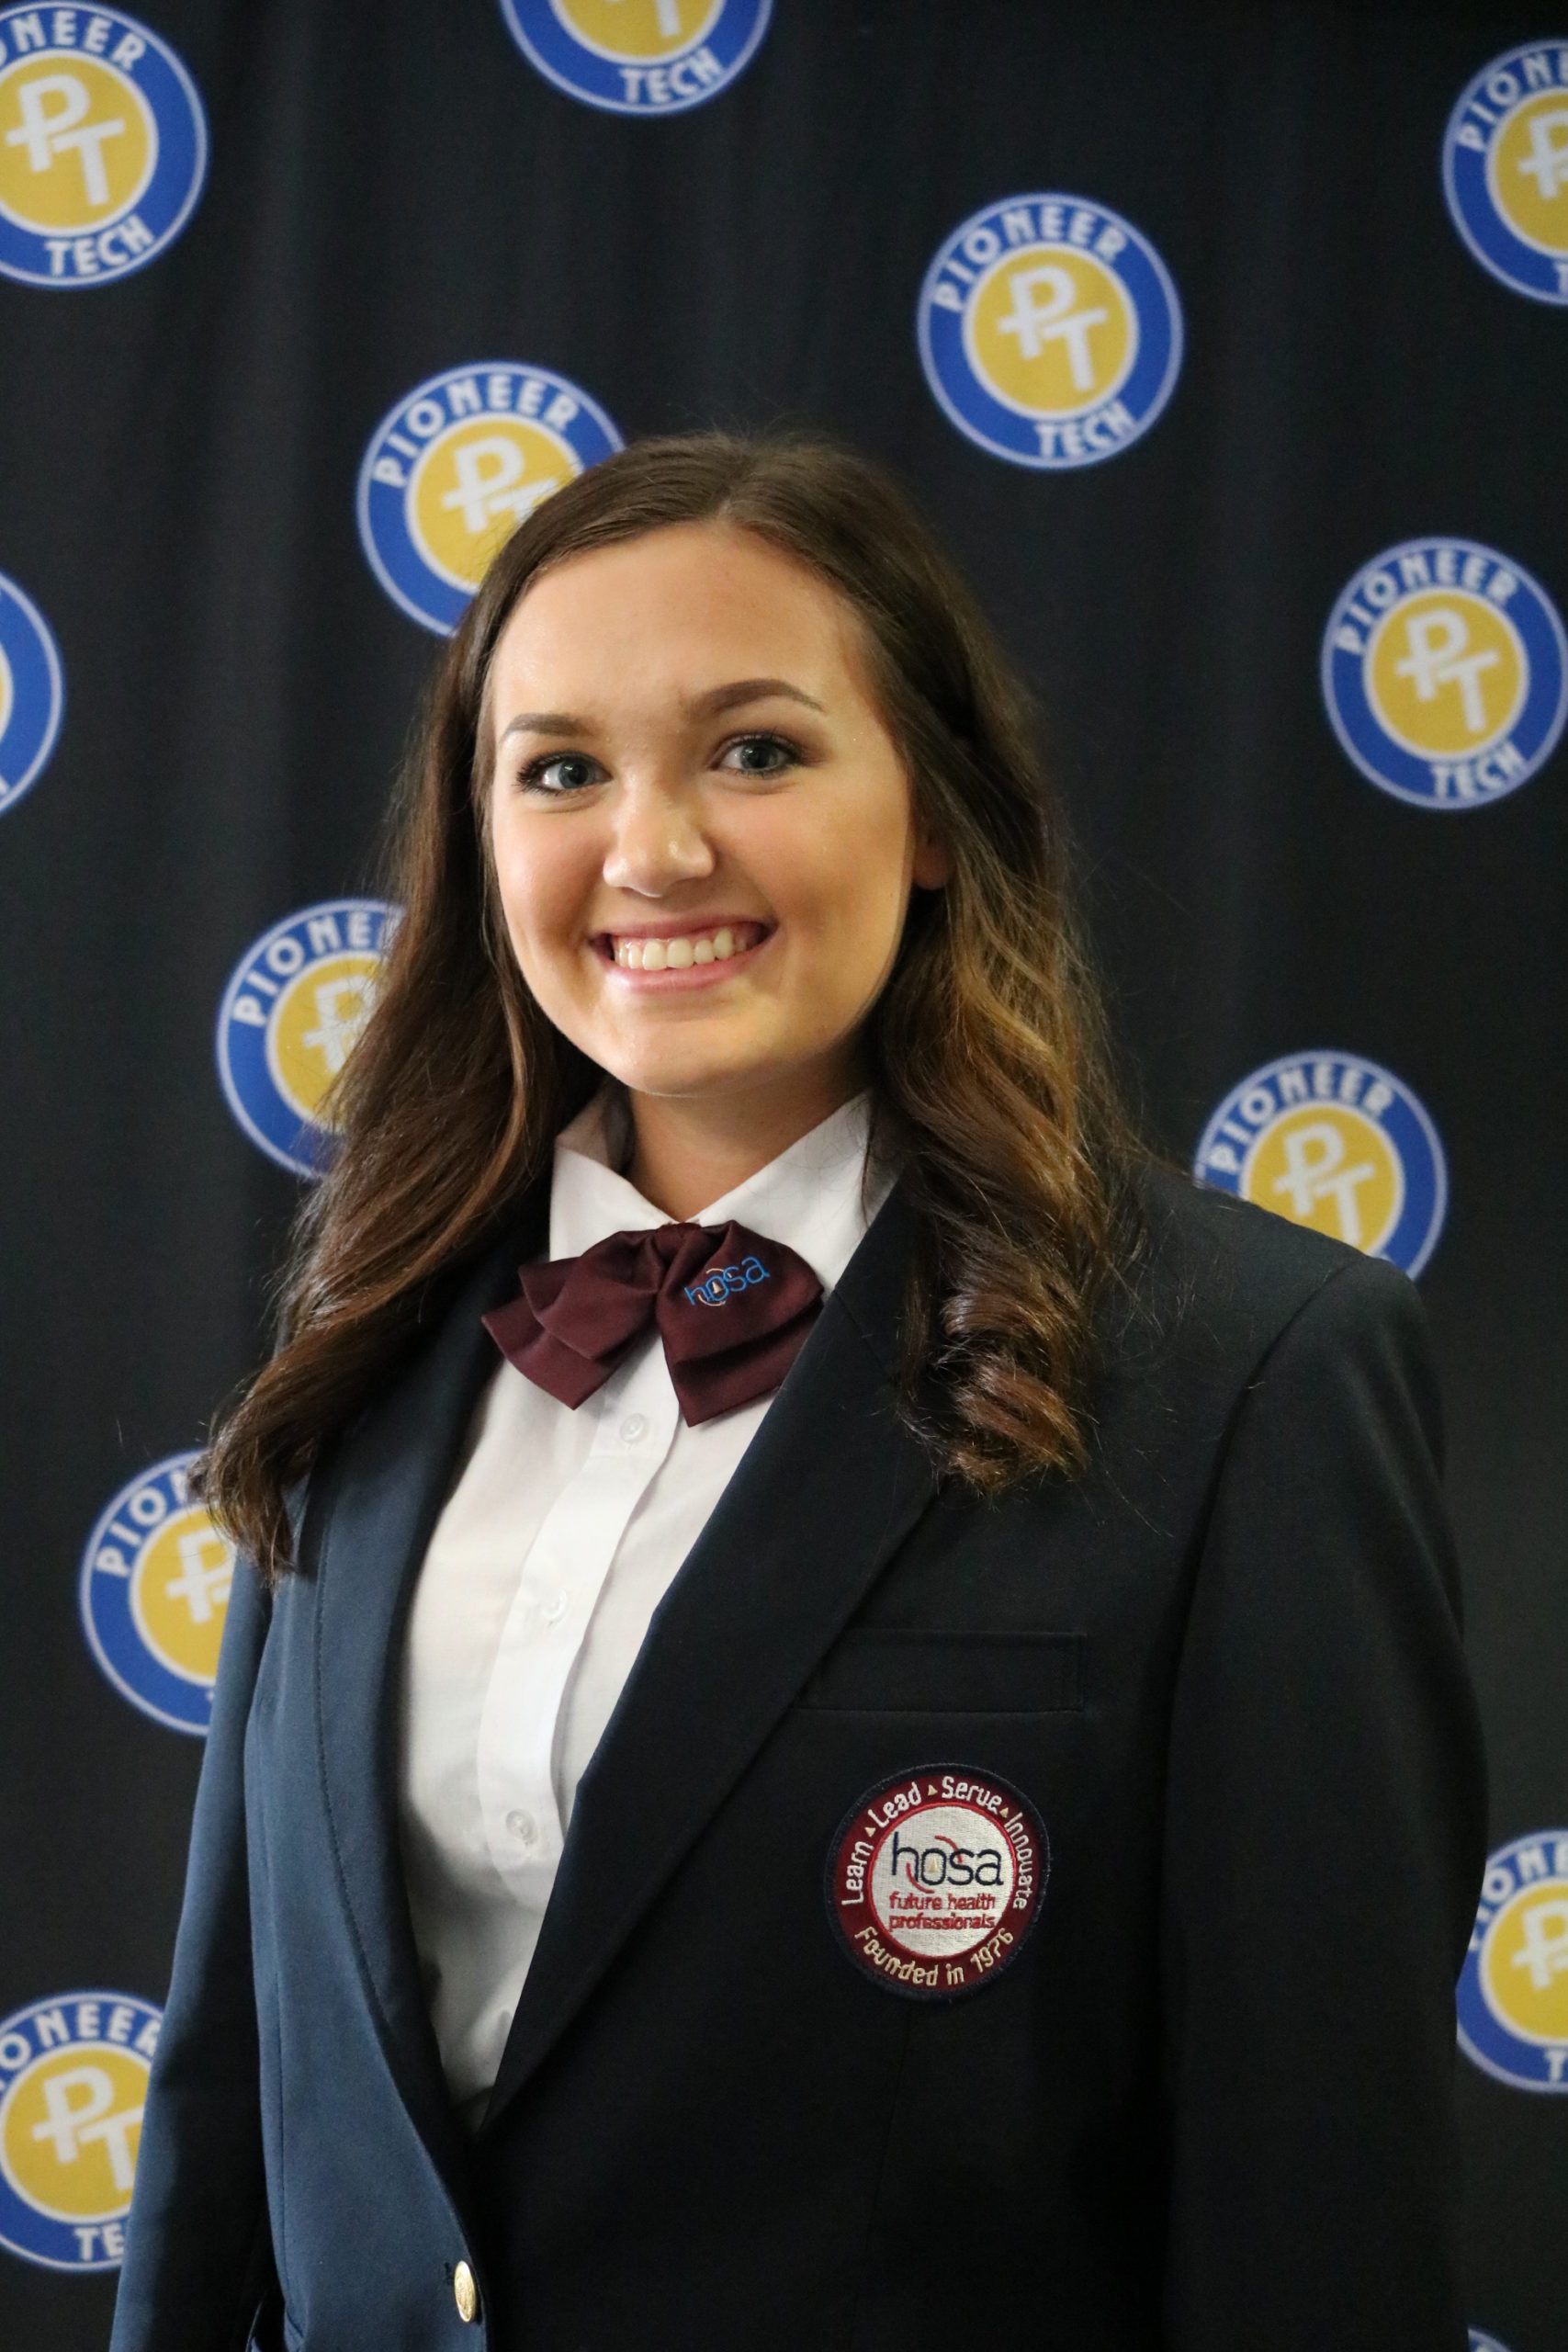 Pioneer Tech student elected State Officer of Future Health Professionals